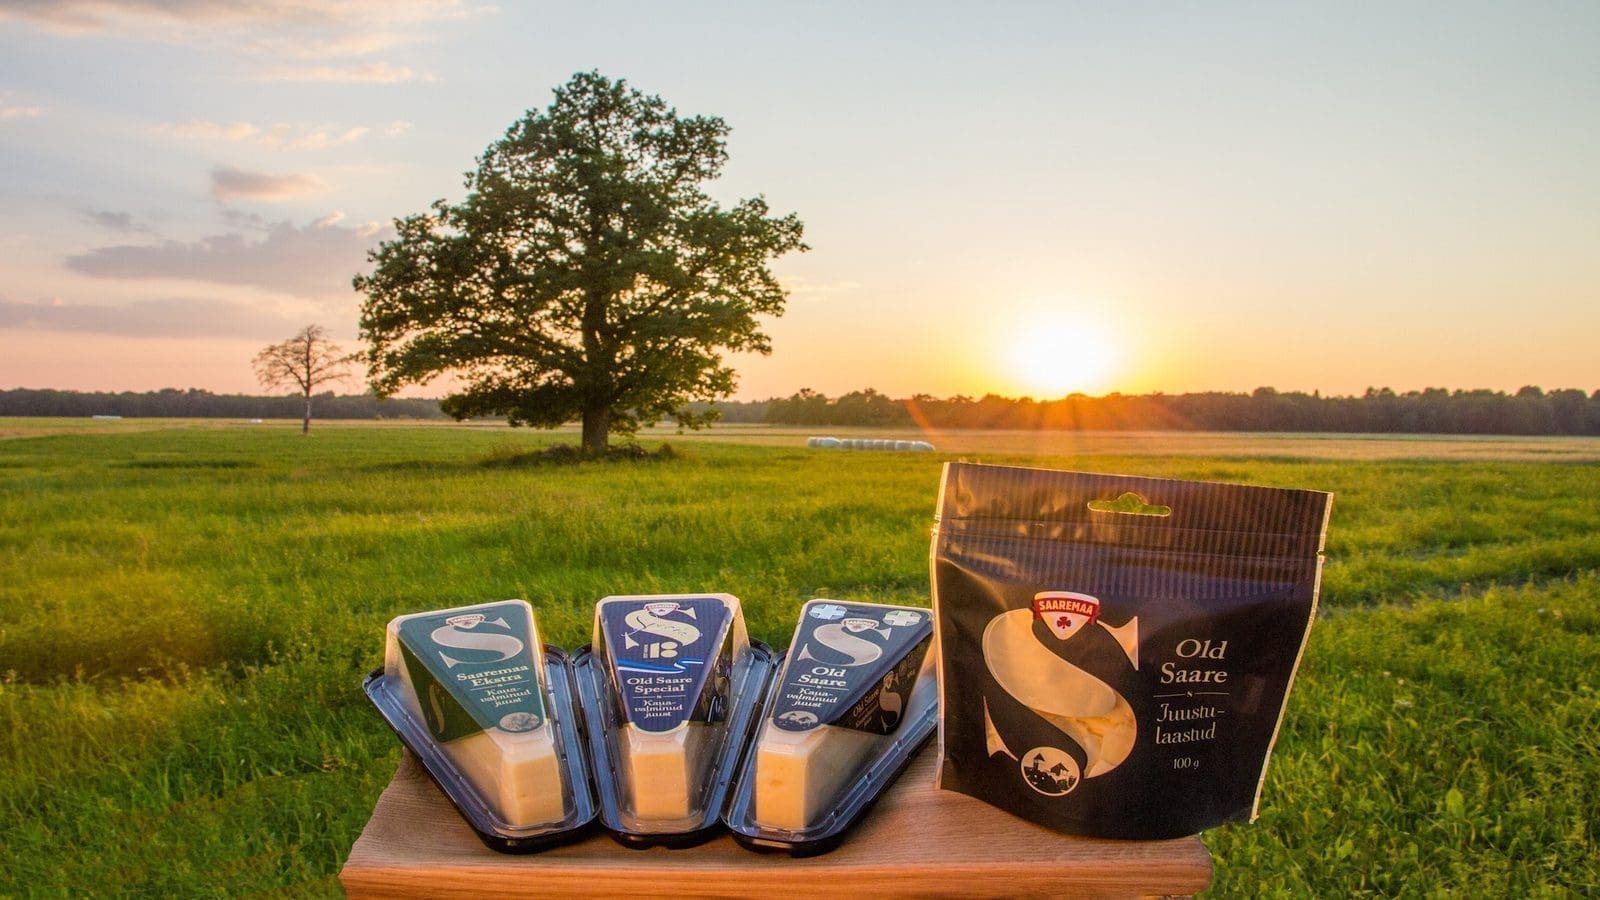 United Estover Group acquires Saaremaa Dairy to bolster competitive ability in dairy markets